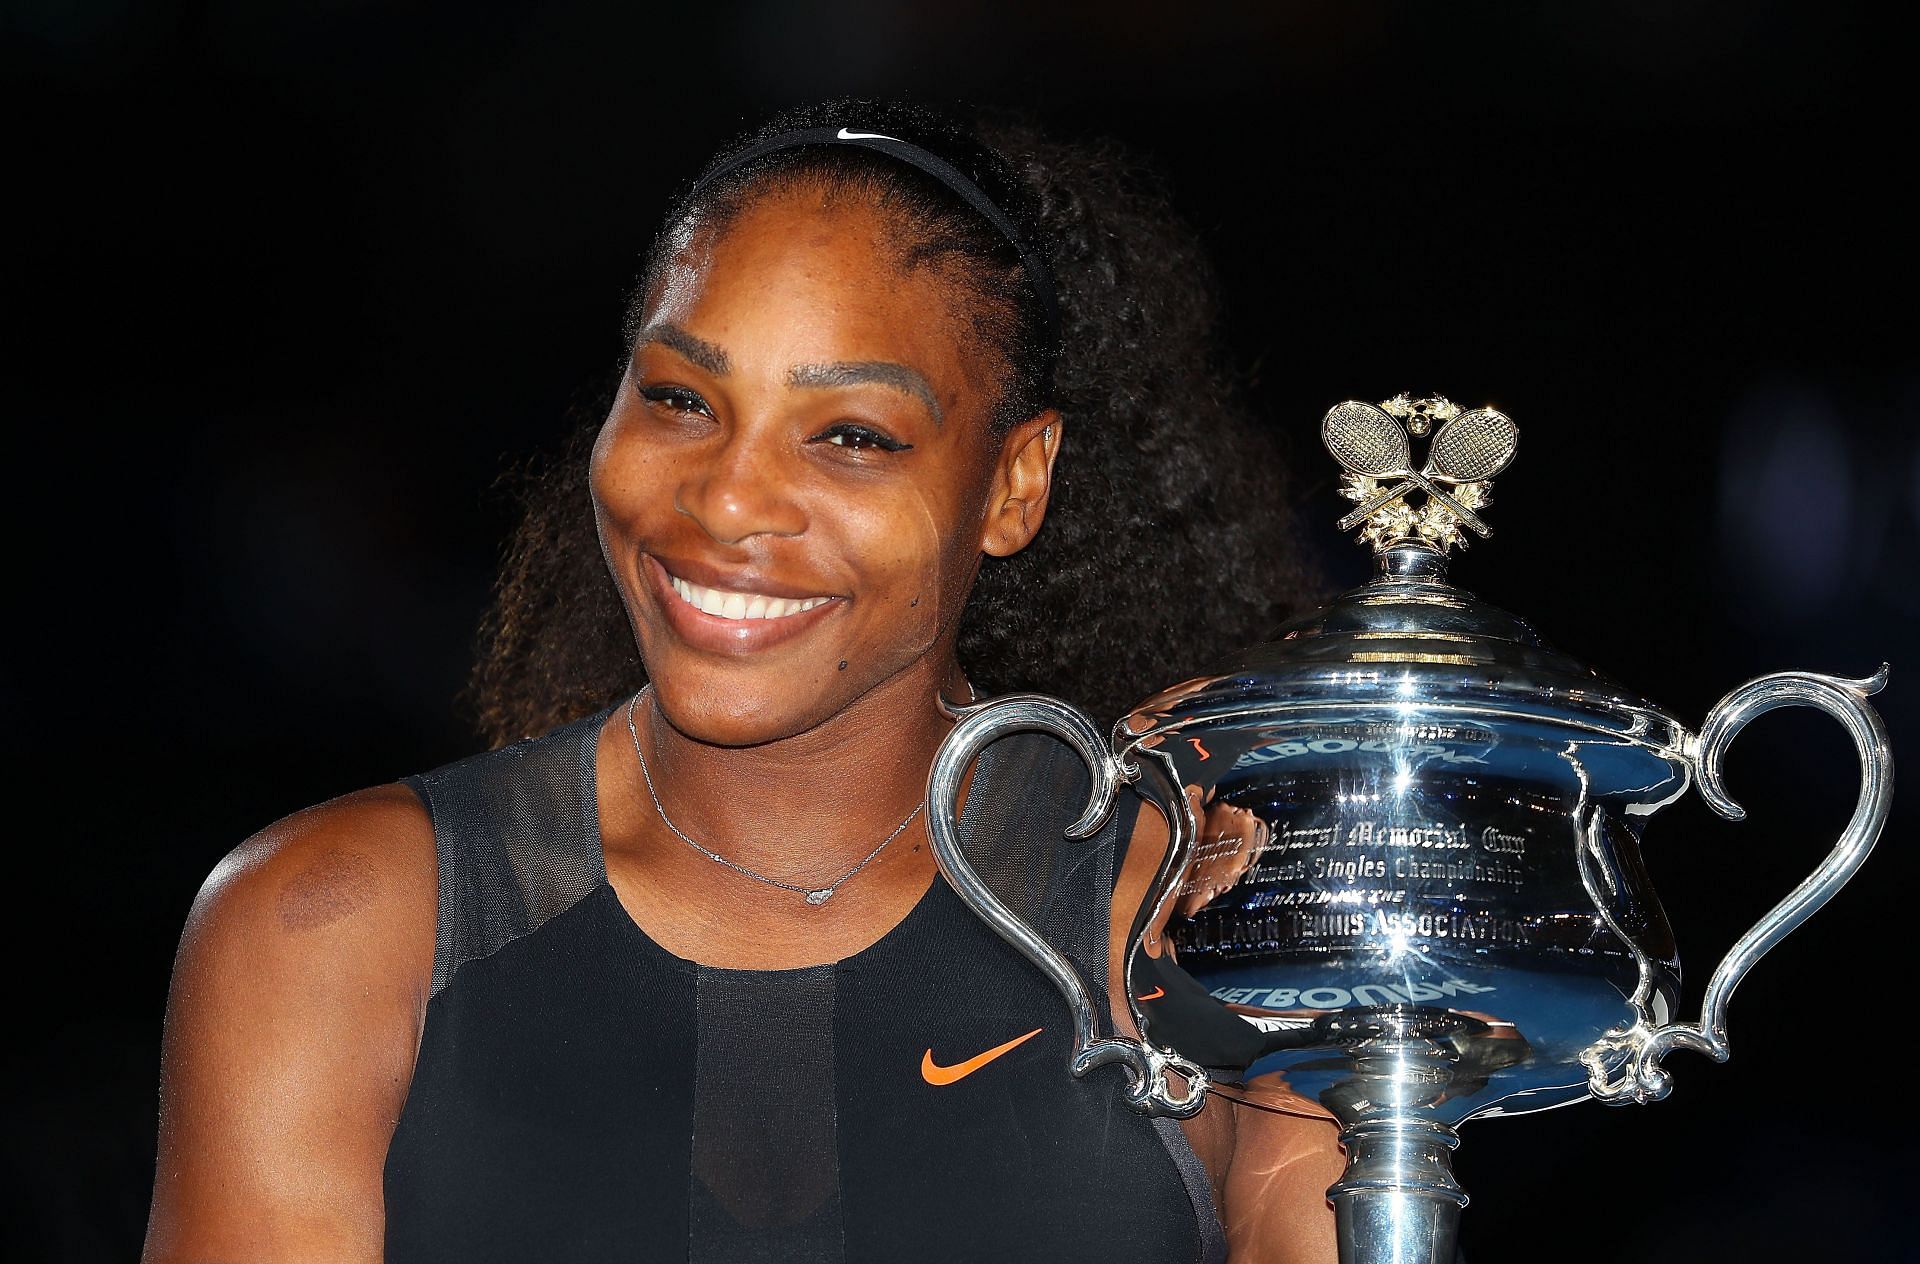 Serena Williams with her 2017 Australian Open title